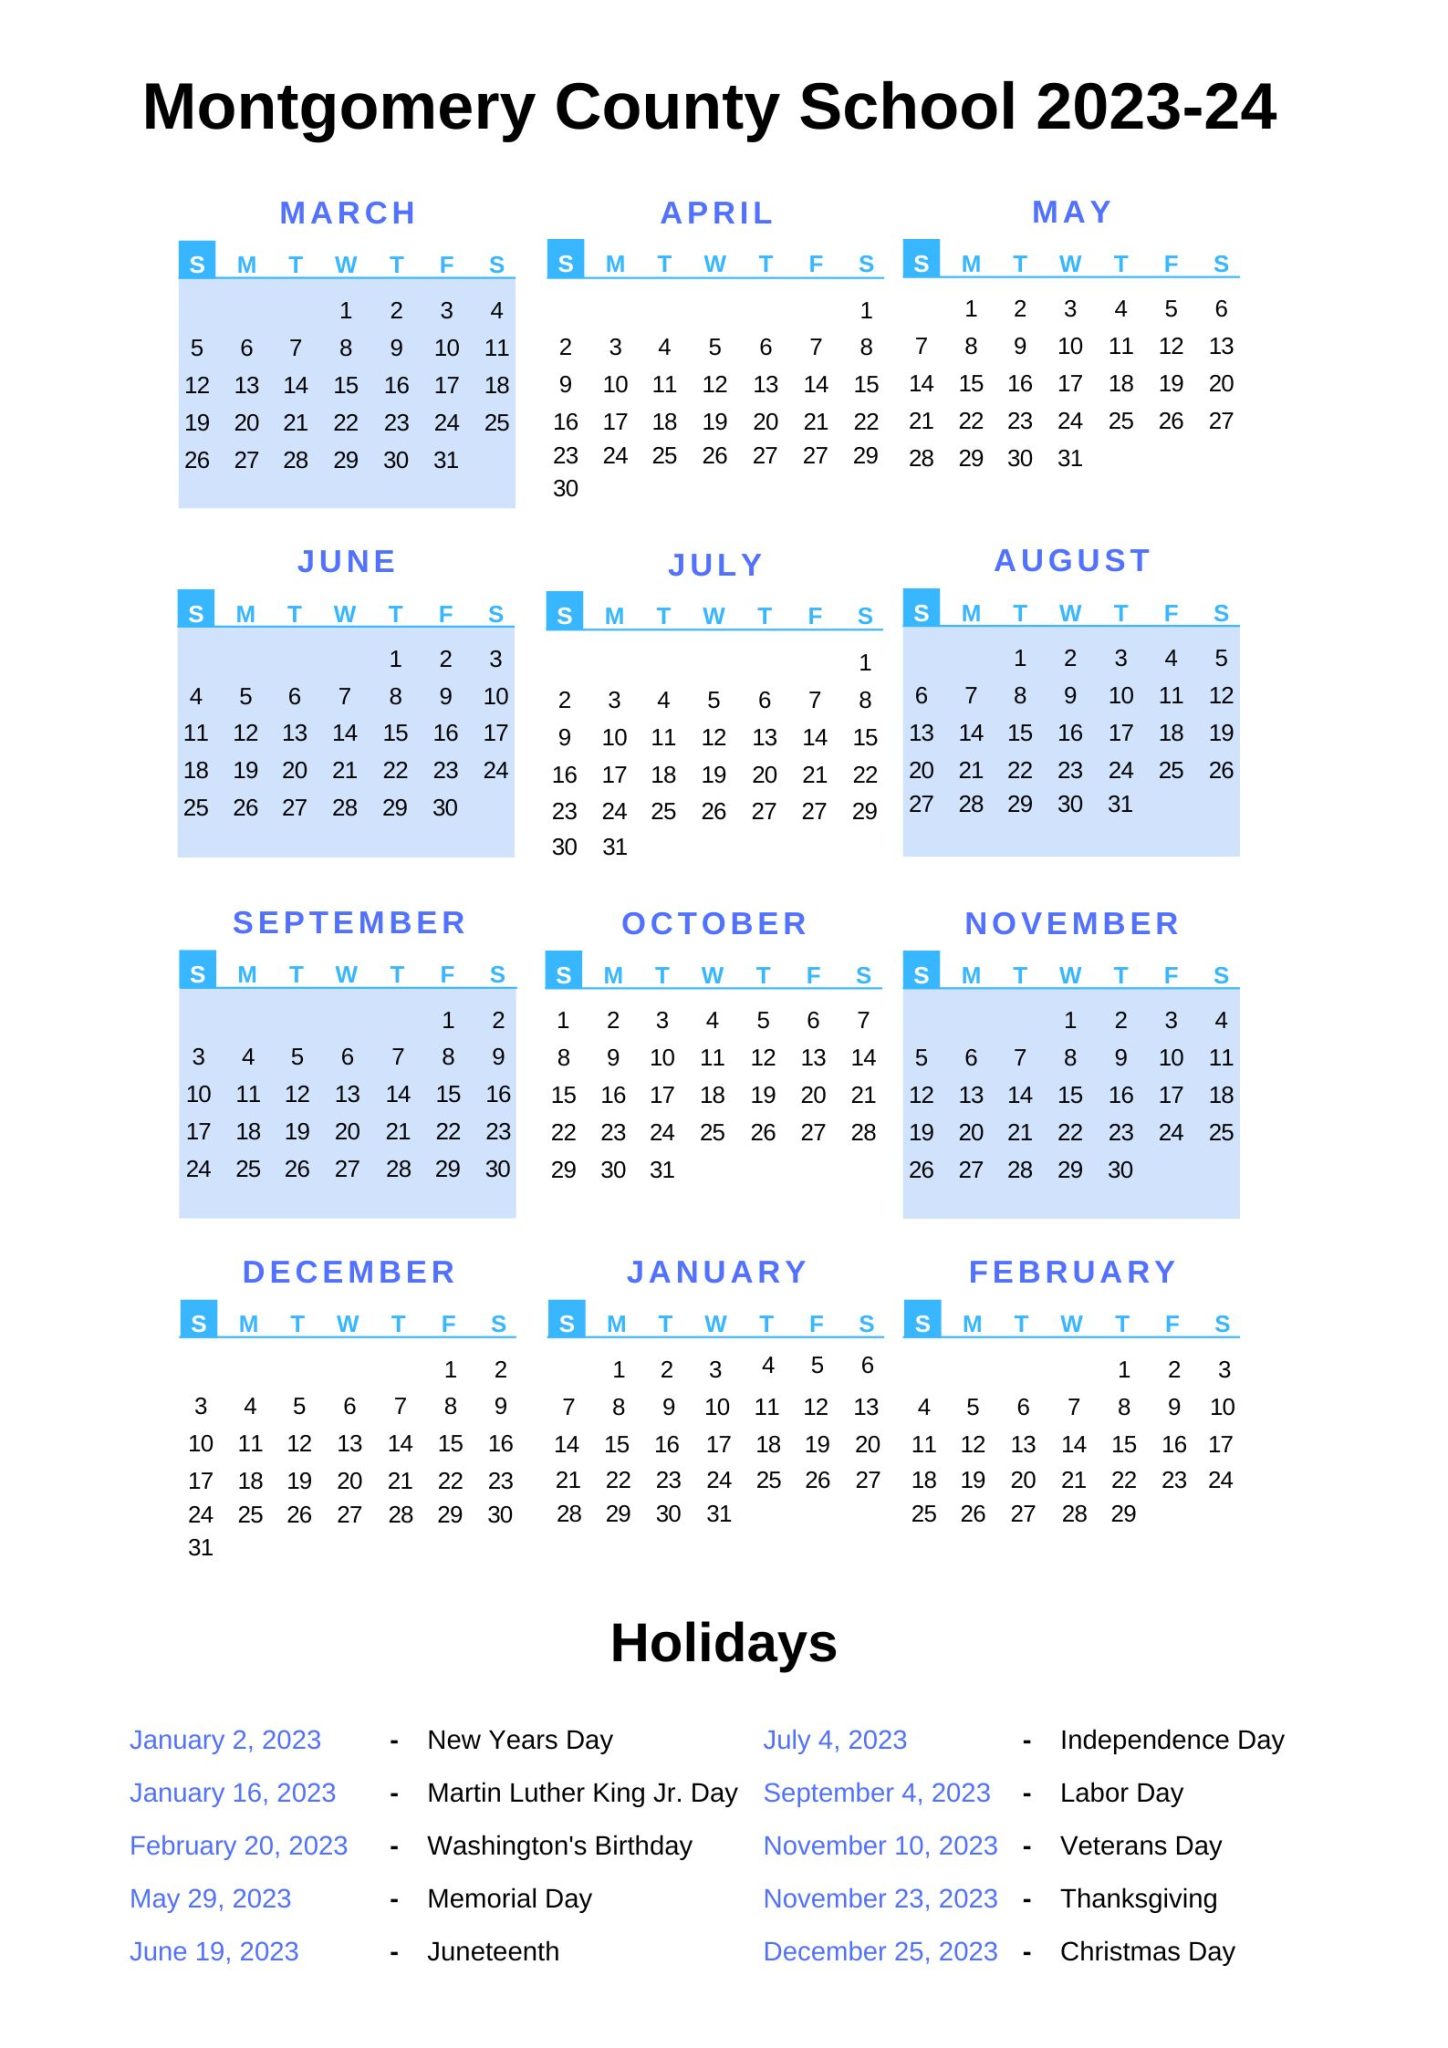 Montgomery County Schools Calendar 202324 With Holidays